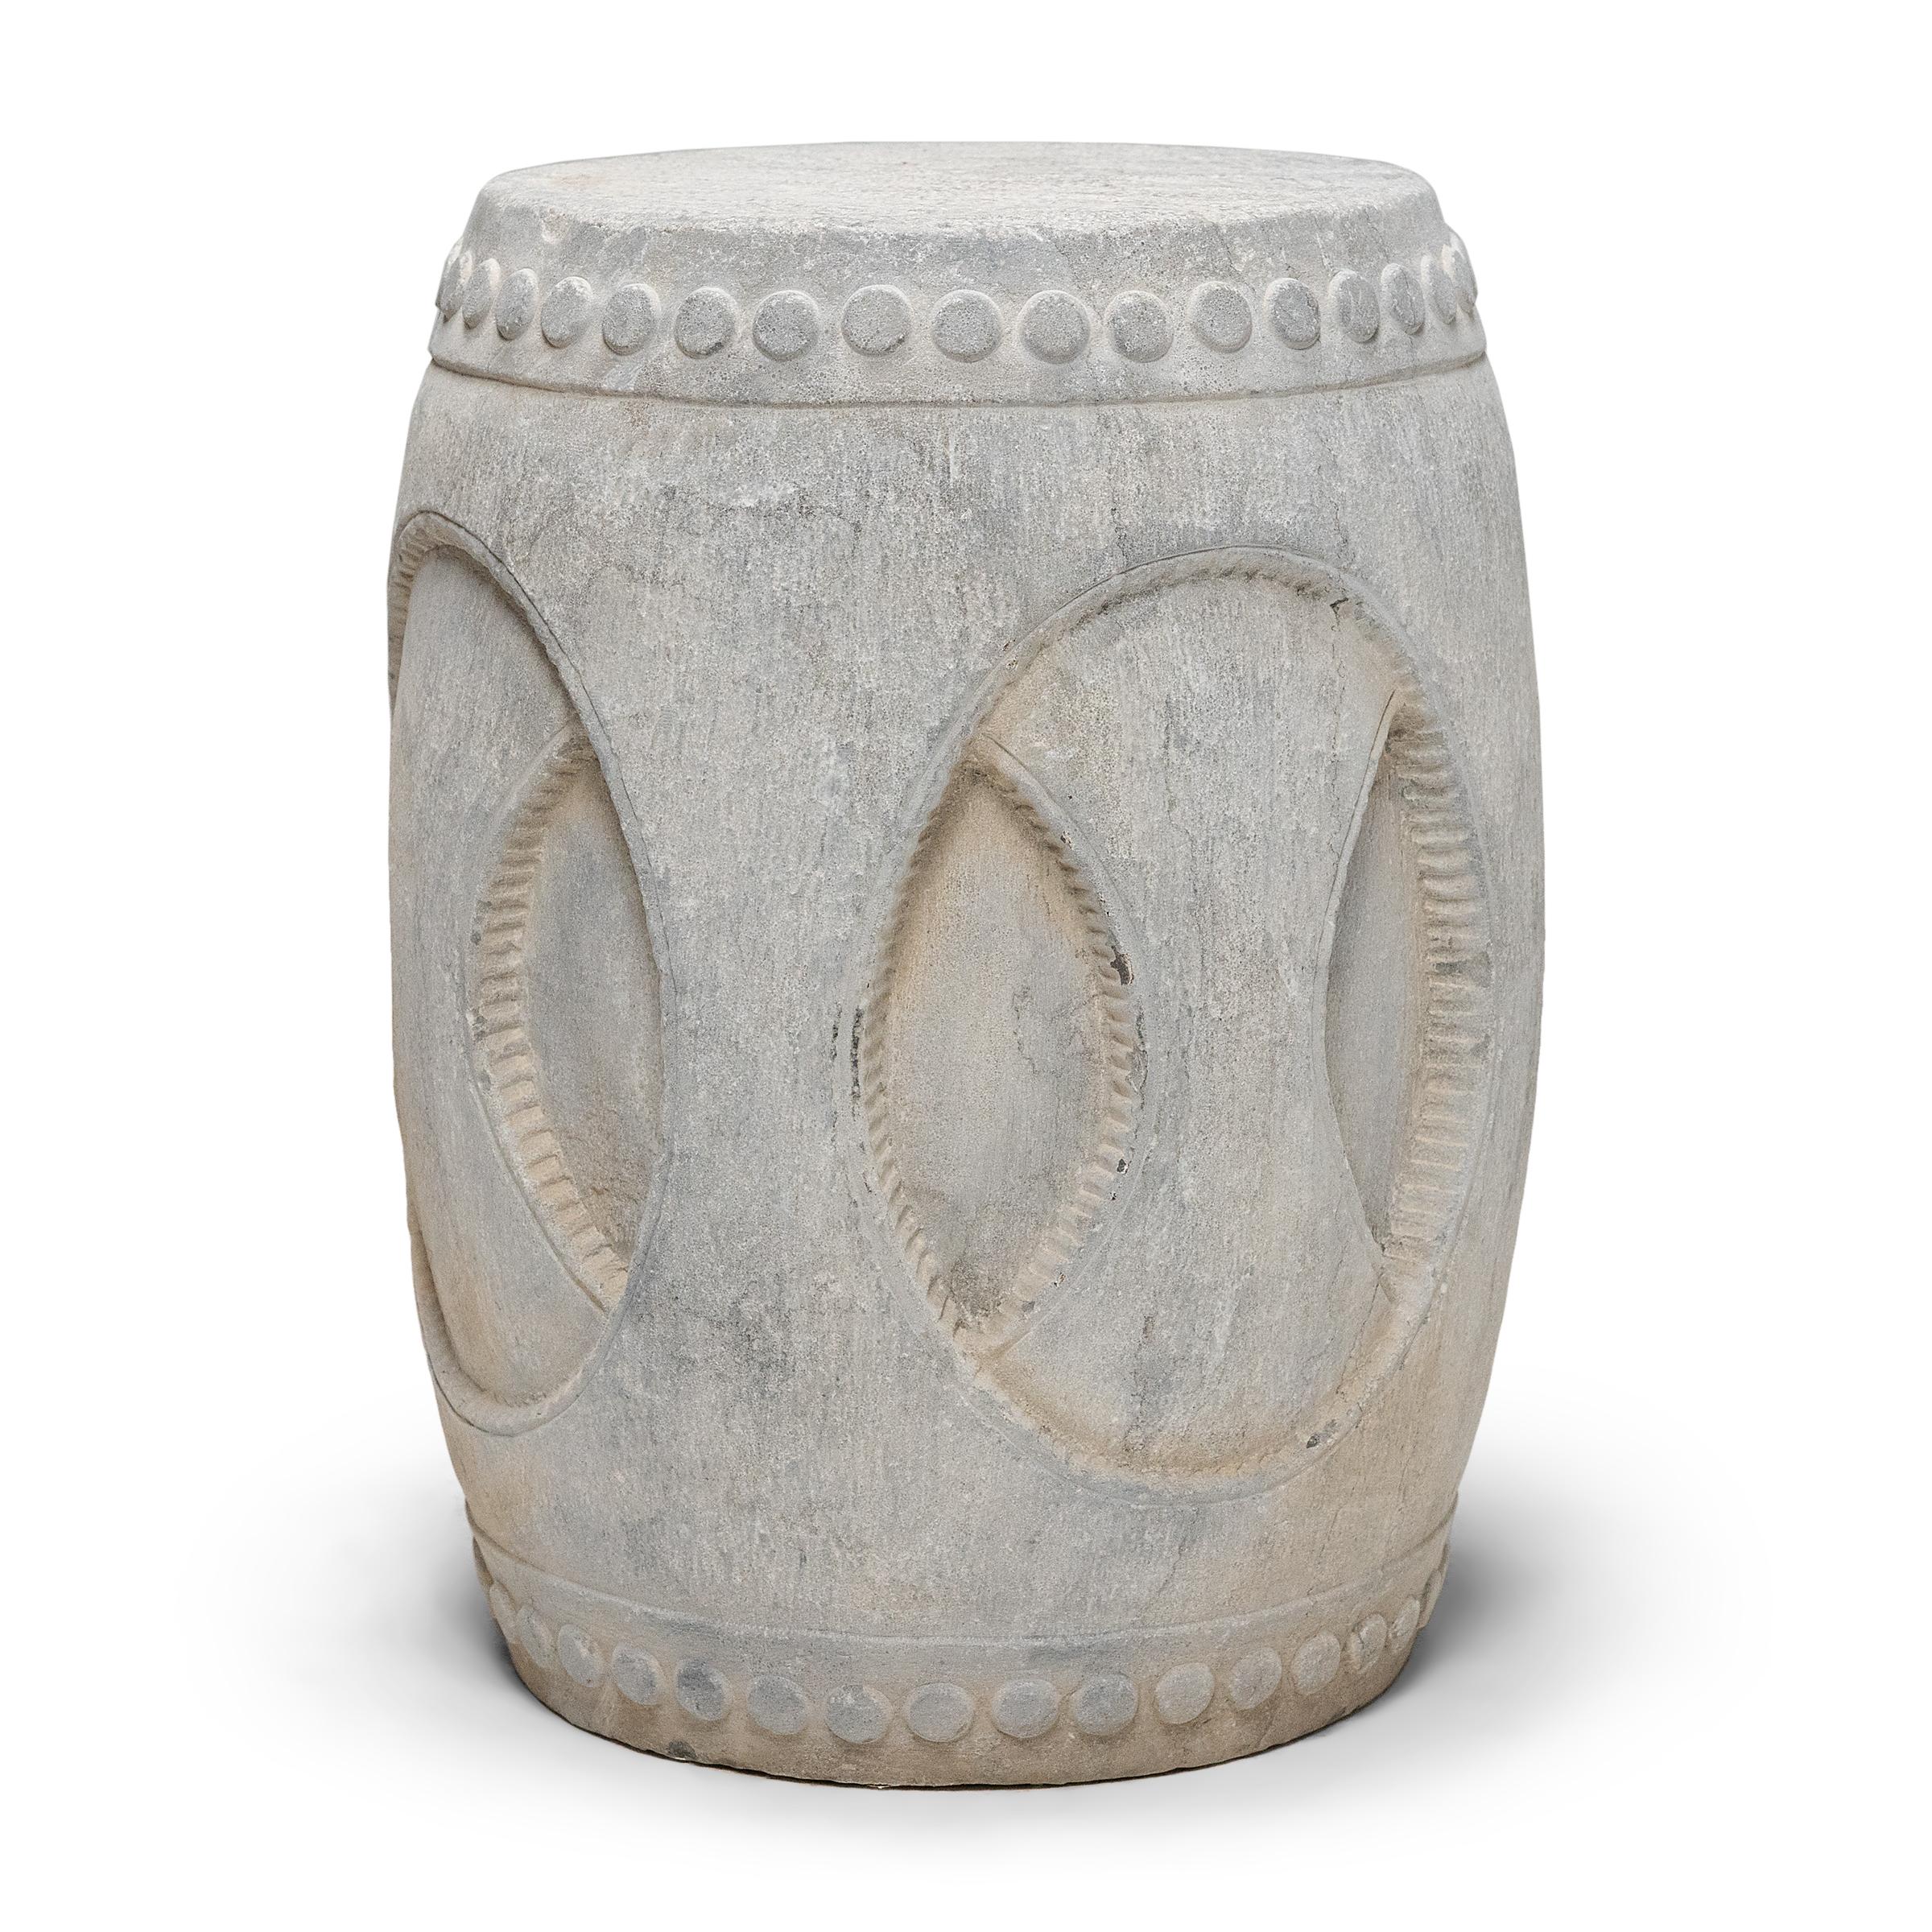 Drum-form stools such as this were traditionally used in gardens and outdoor pavilions where upper class scholars read, wrote, gathered for discussion and, in general, developed their inner sensibilities. This contemporary example was carved from a